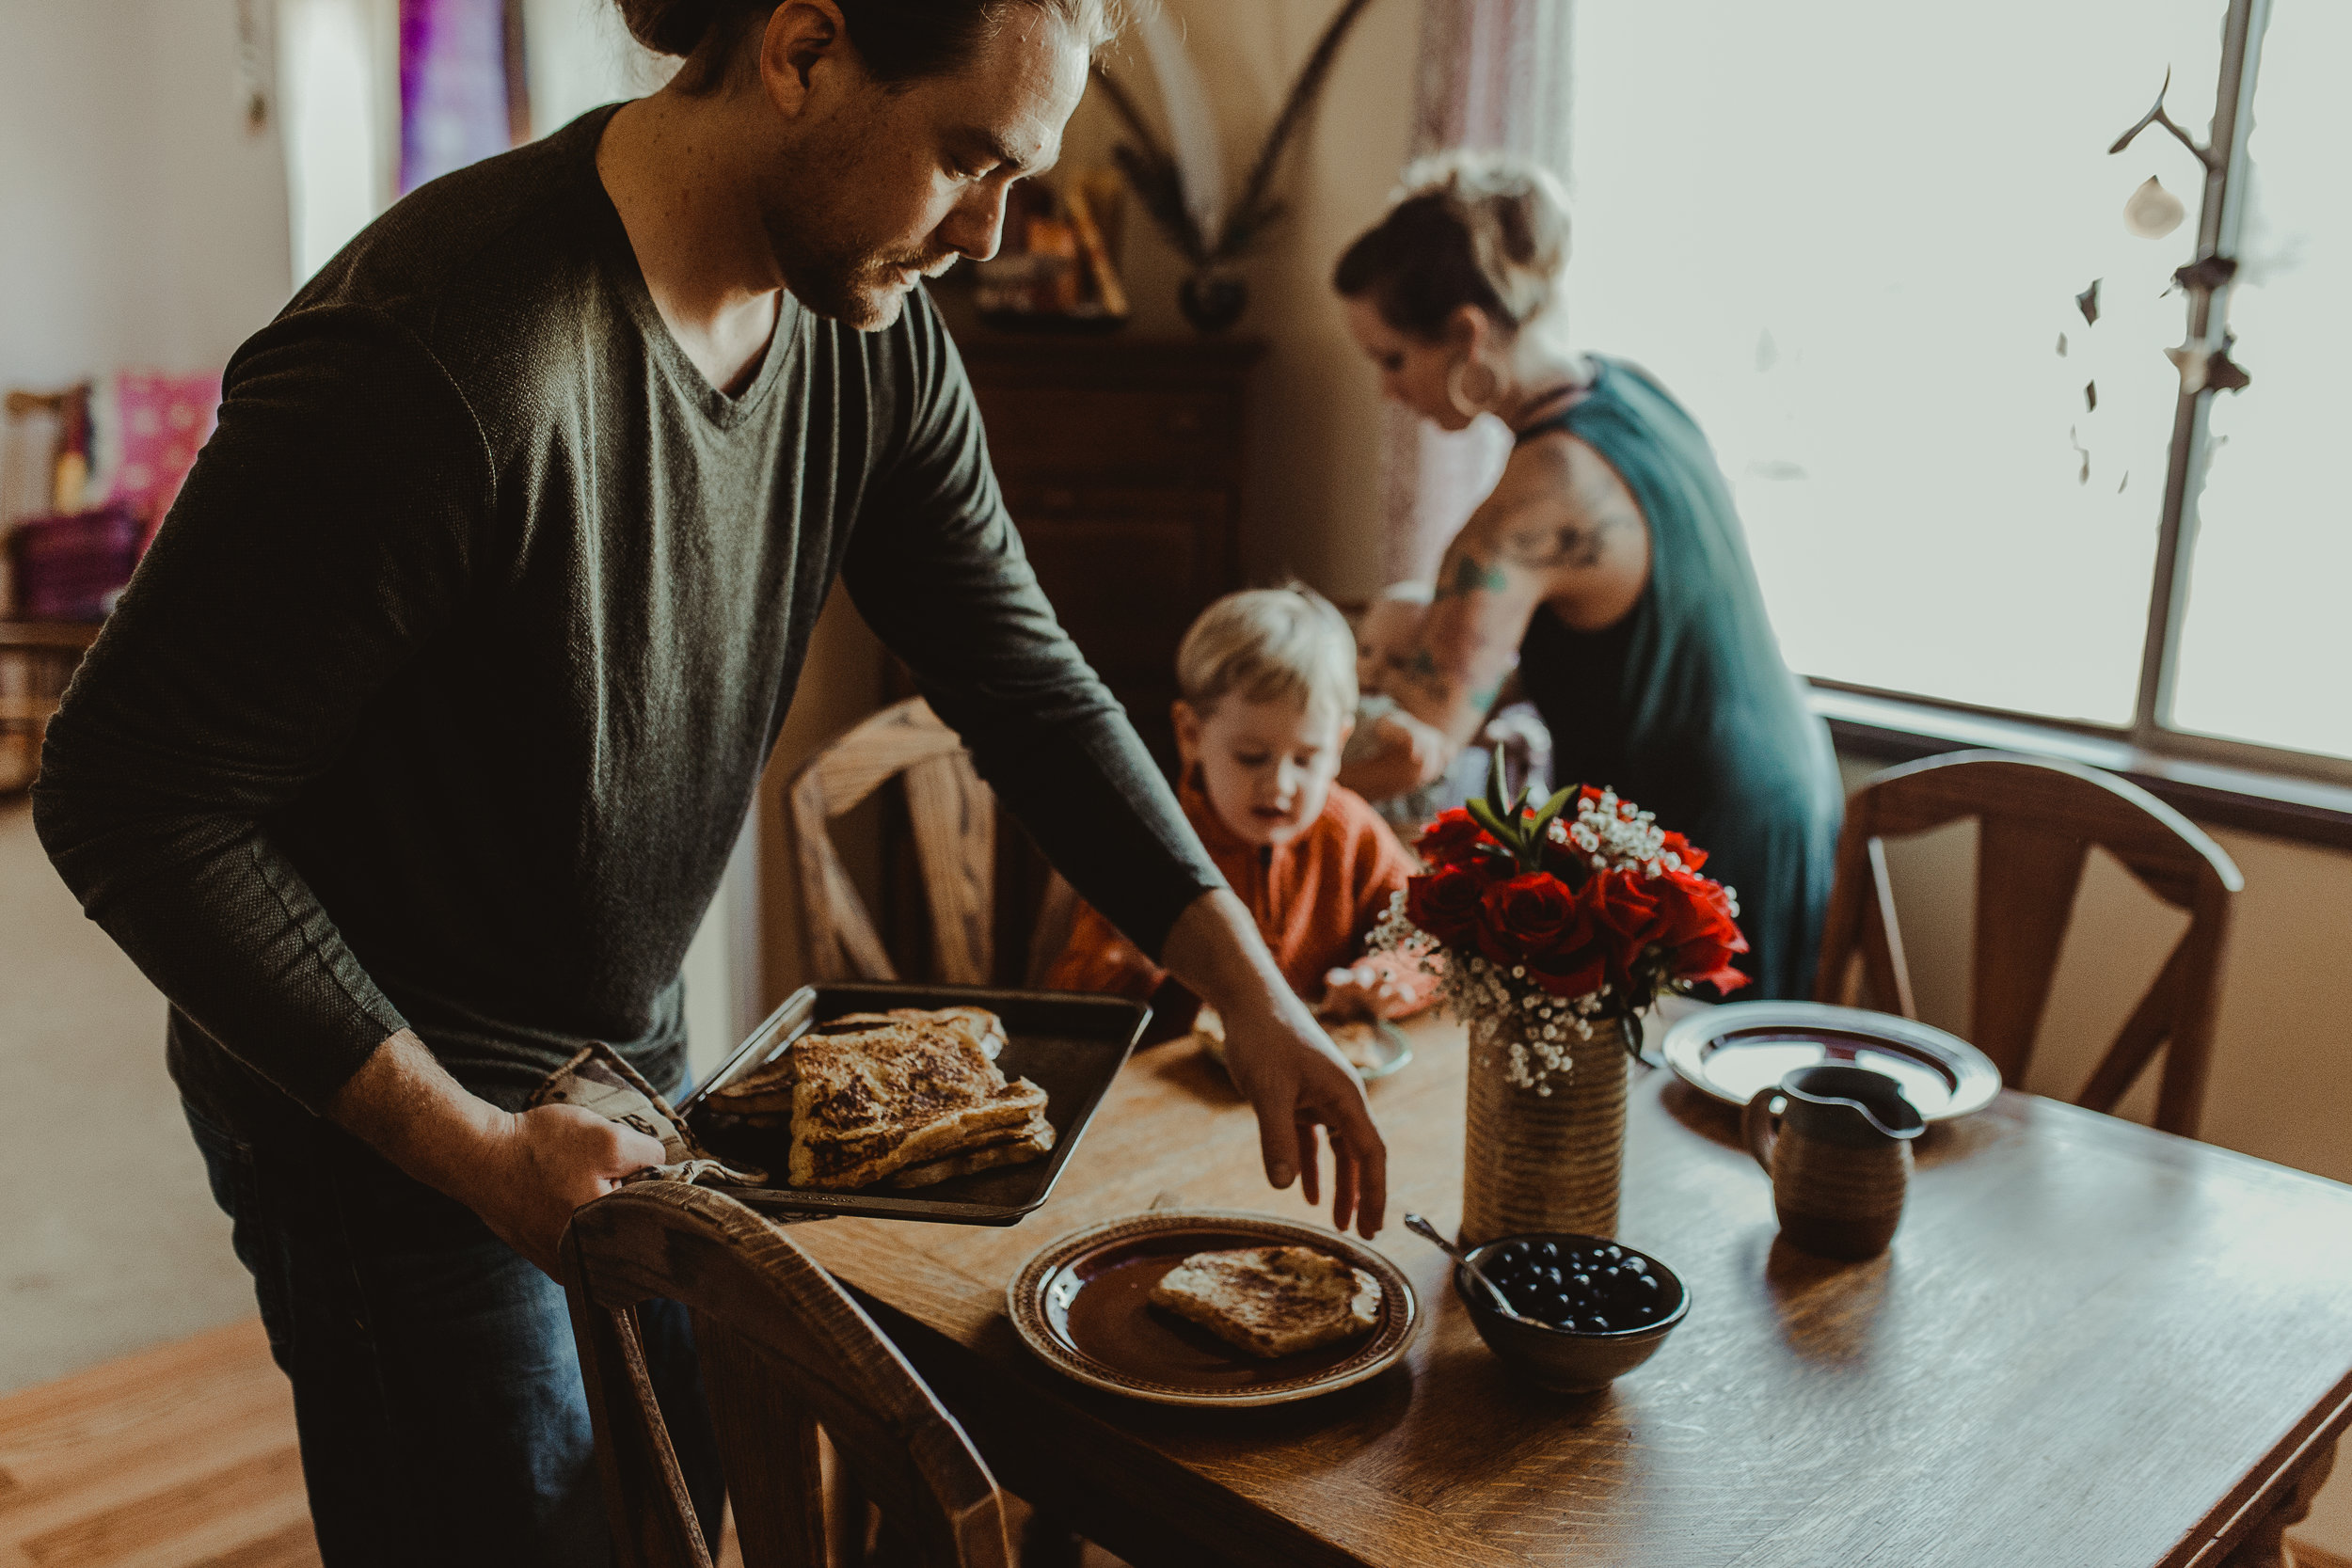  Dad serving breakfast to family at table 